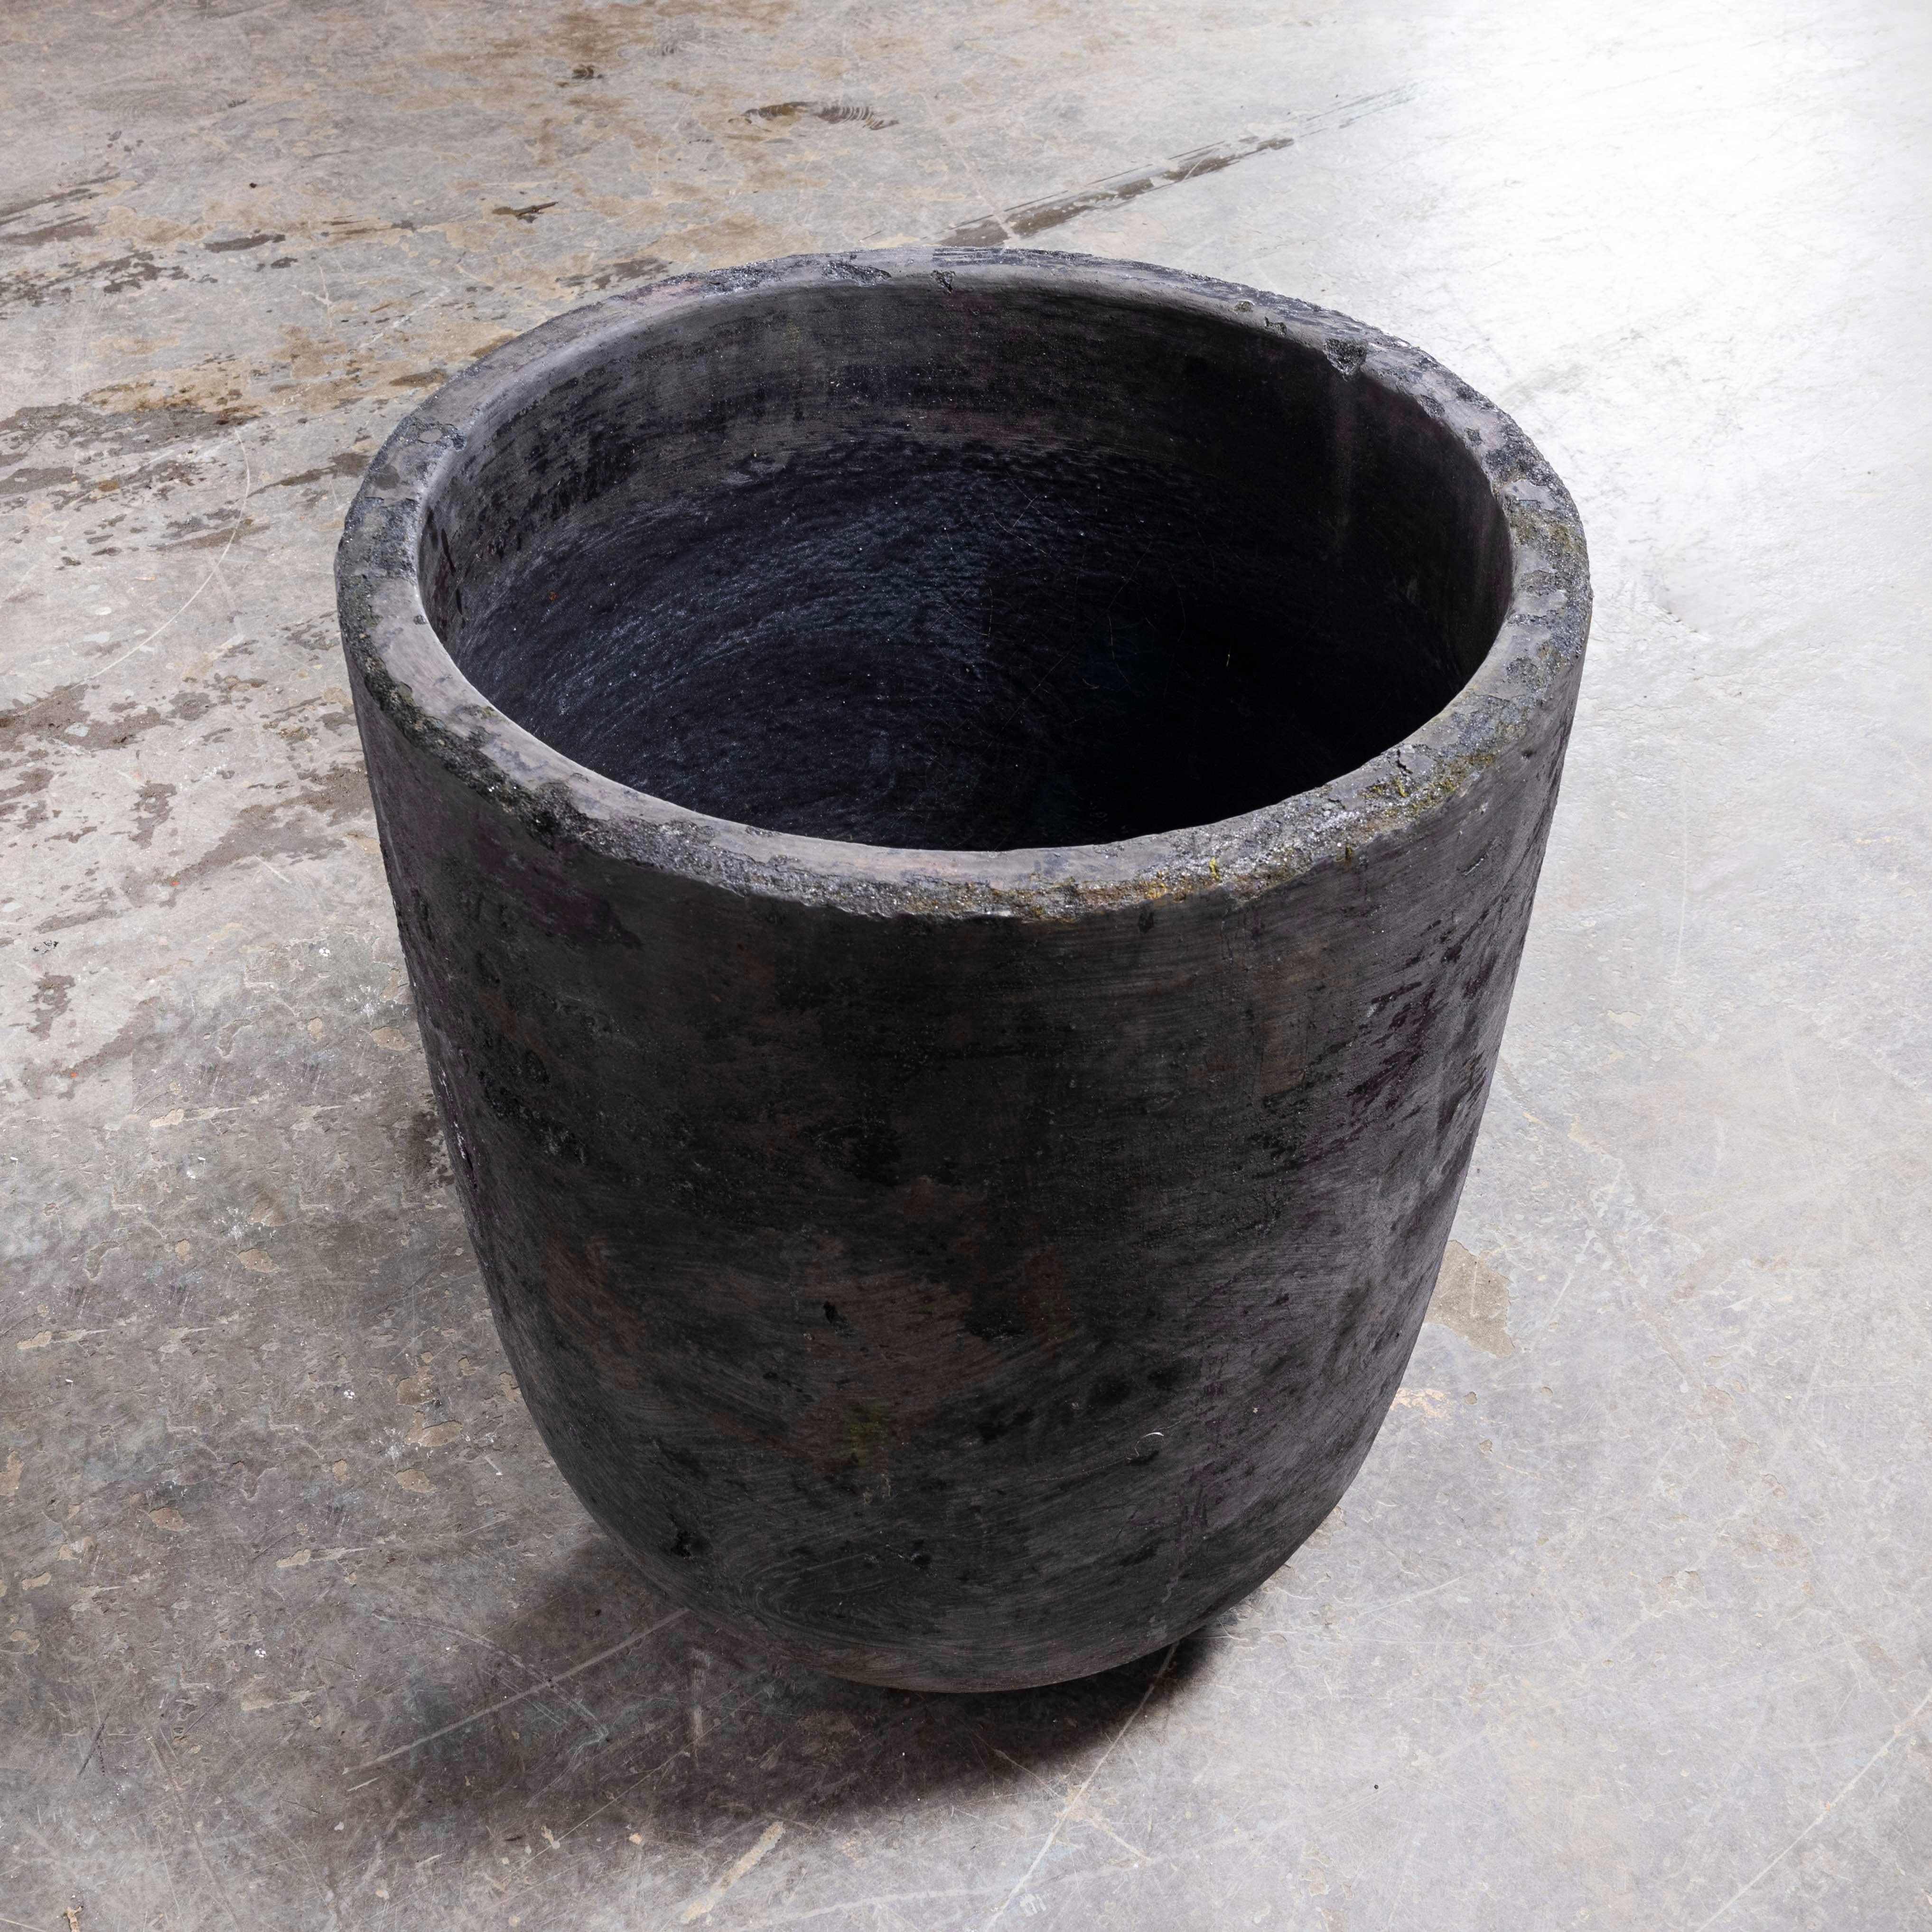 1970’s New Old Stock Foundry Crucible Pot (1525.5)
1970’s New Old Stock Foundry Crucible Pot. Sourced in Belgium this crucible pot is new old stock from the 1970’s, never used. Crucible pots are high heat resistant pots used to hold and pour molten